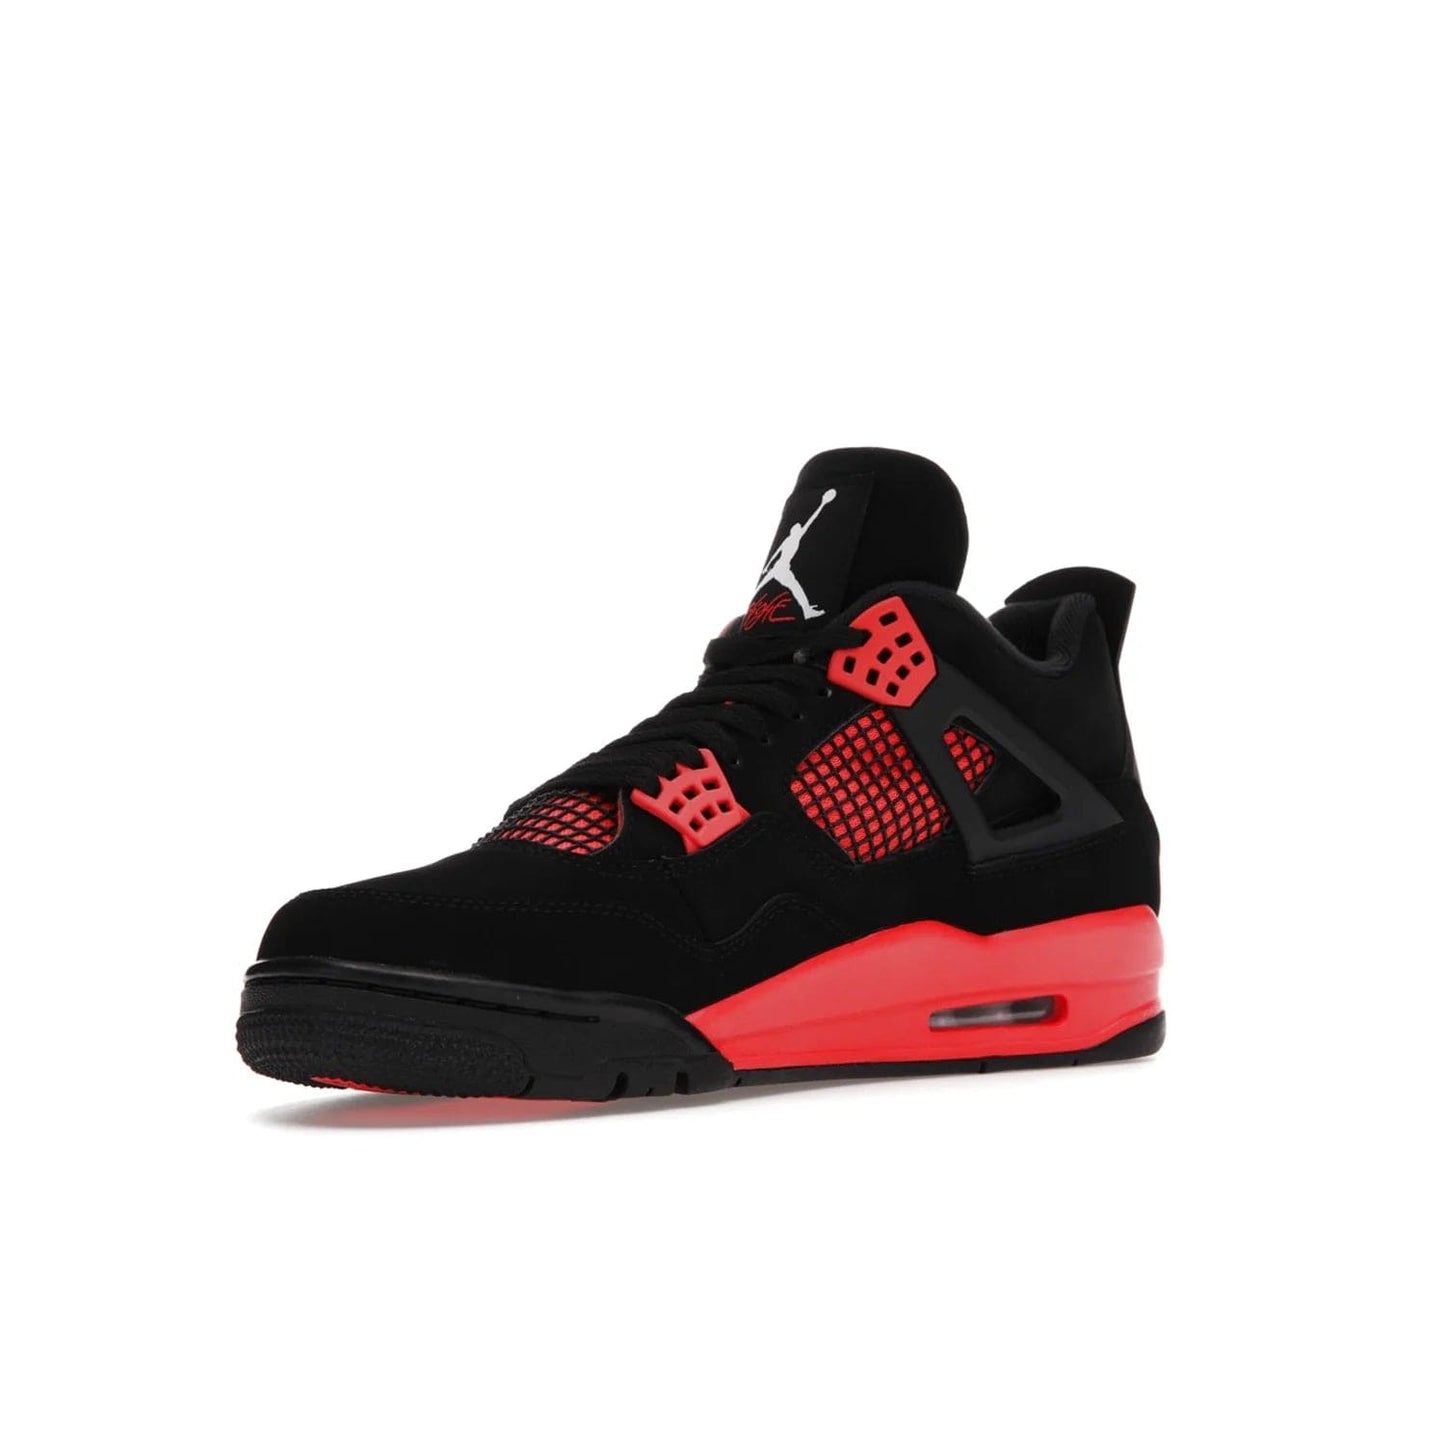 Jordan 4 Retro Red Thunder - Image 15 - Only at www.BallersClubKickz.com - Upscale your footwear with the Air Jordan 4 Retro Red Thunder. Featuring a Durabuck upper, red underlays, signature Flight patch, and vibrant red midsole, this retro sneaker adds style and edge. Releases in January 2022.